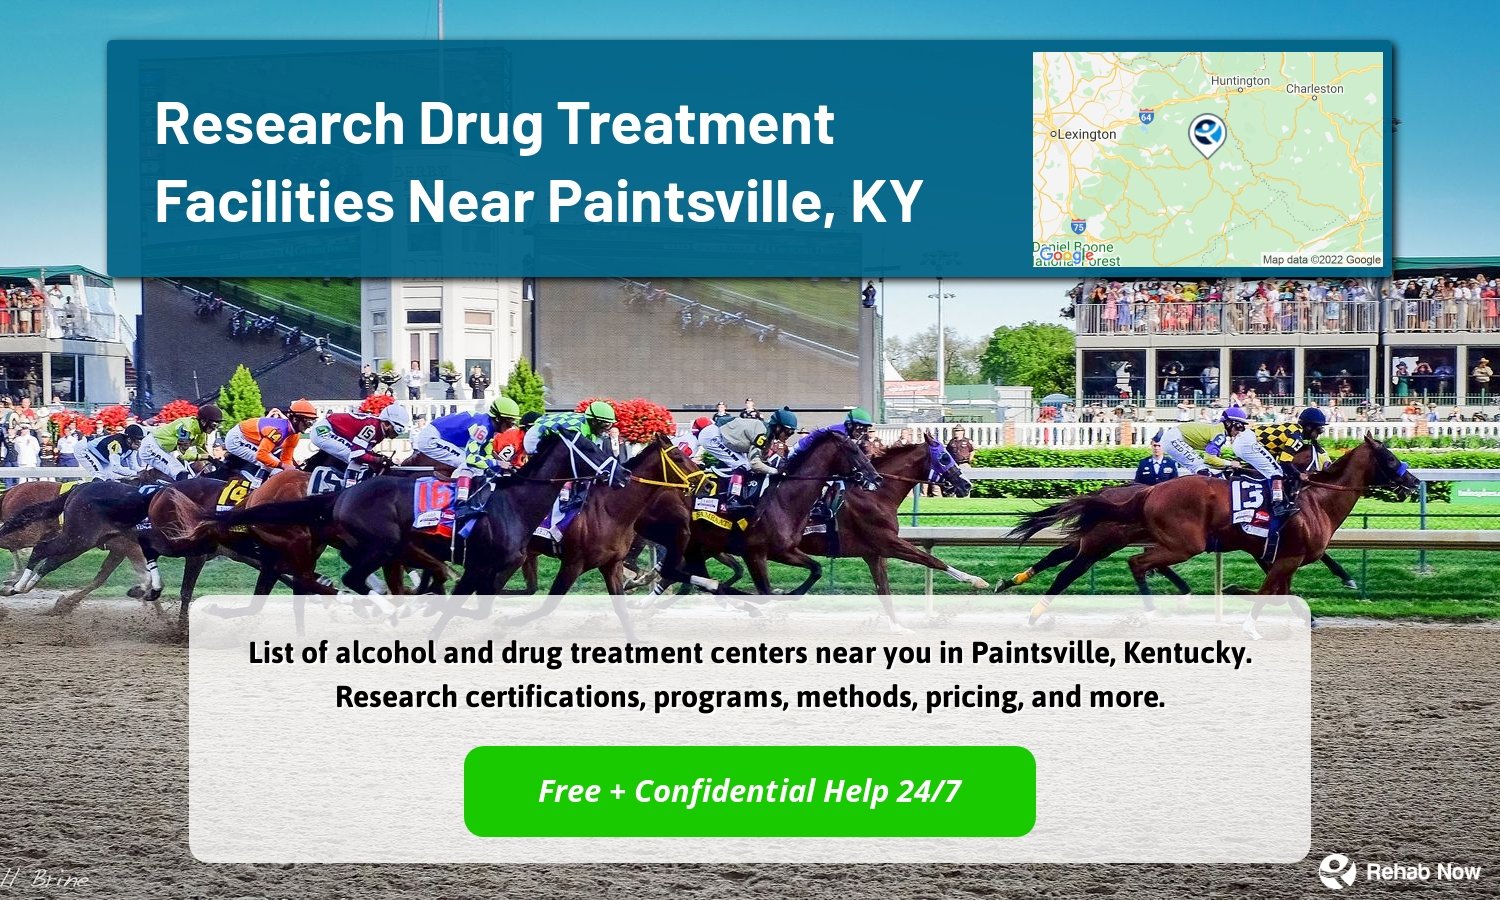 List of alcohol and drug treatment centers near you in Paintsville, Kentucky. Research certifications, programs, methods, pricing, and more.